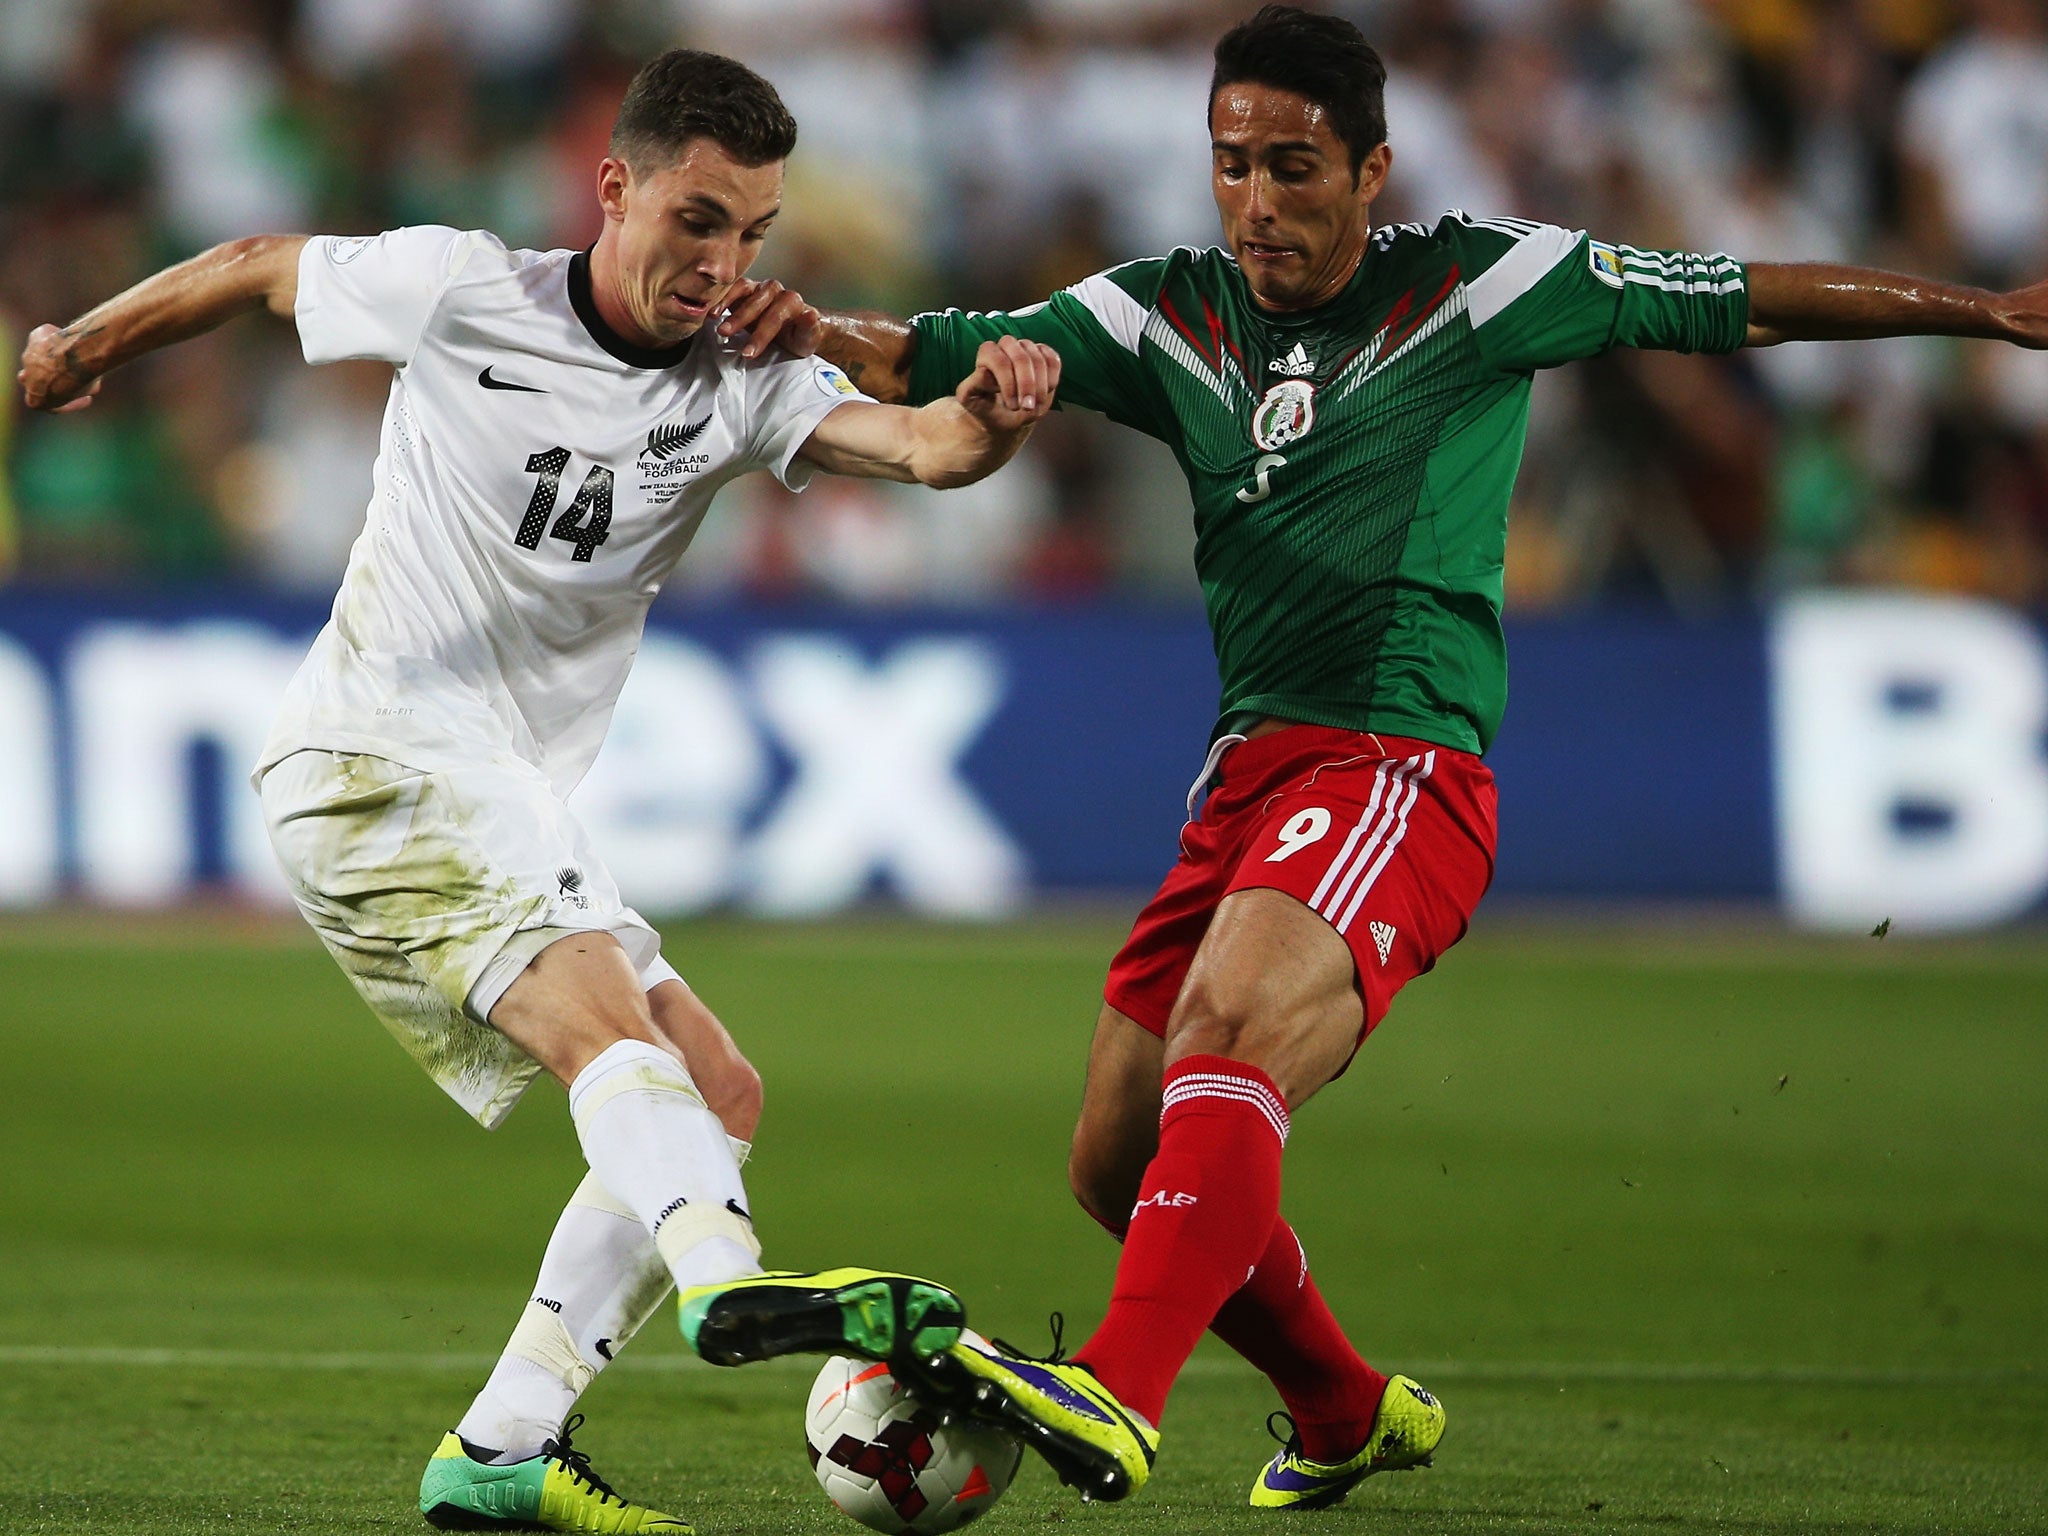 Storm Roux of New Zealand competes with Aldo De Nigris Guajardo of Mexico during the second leg of the Fifa World Cup qualifier